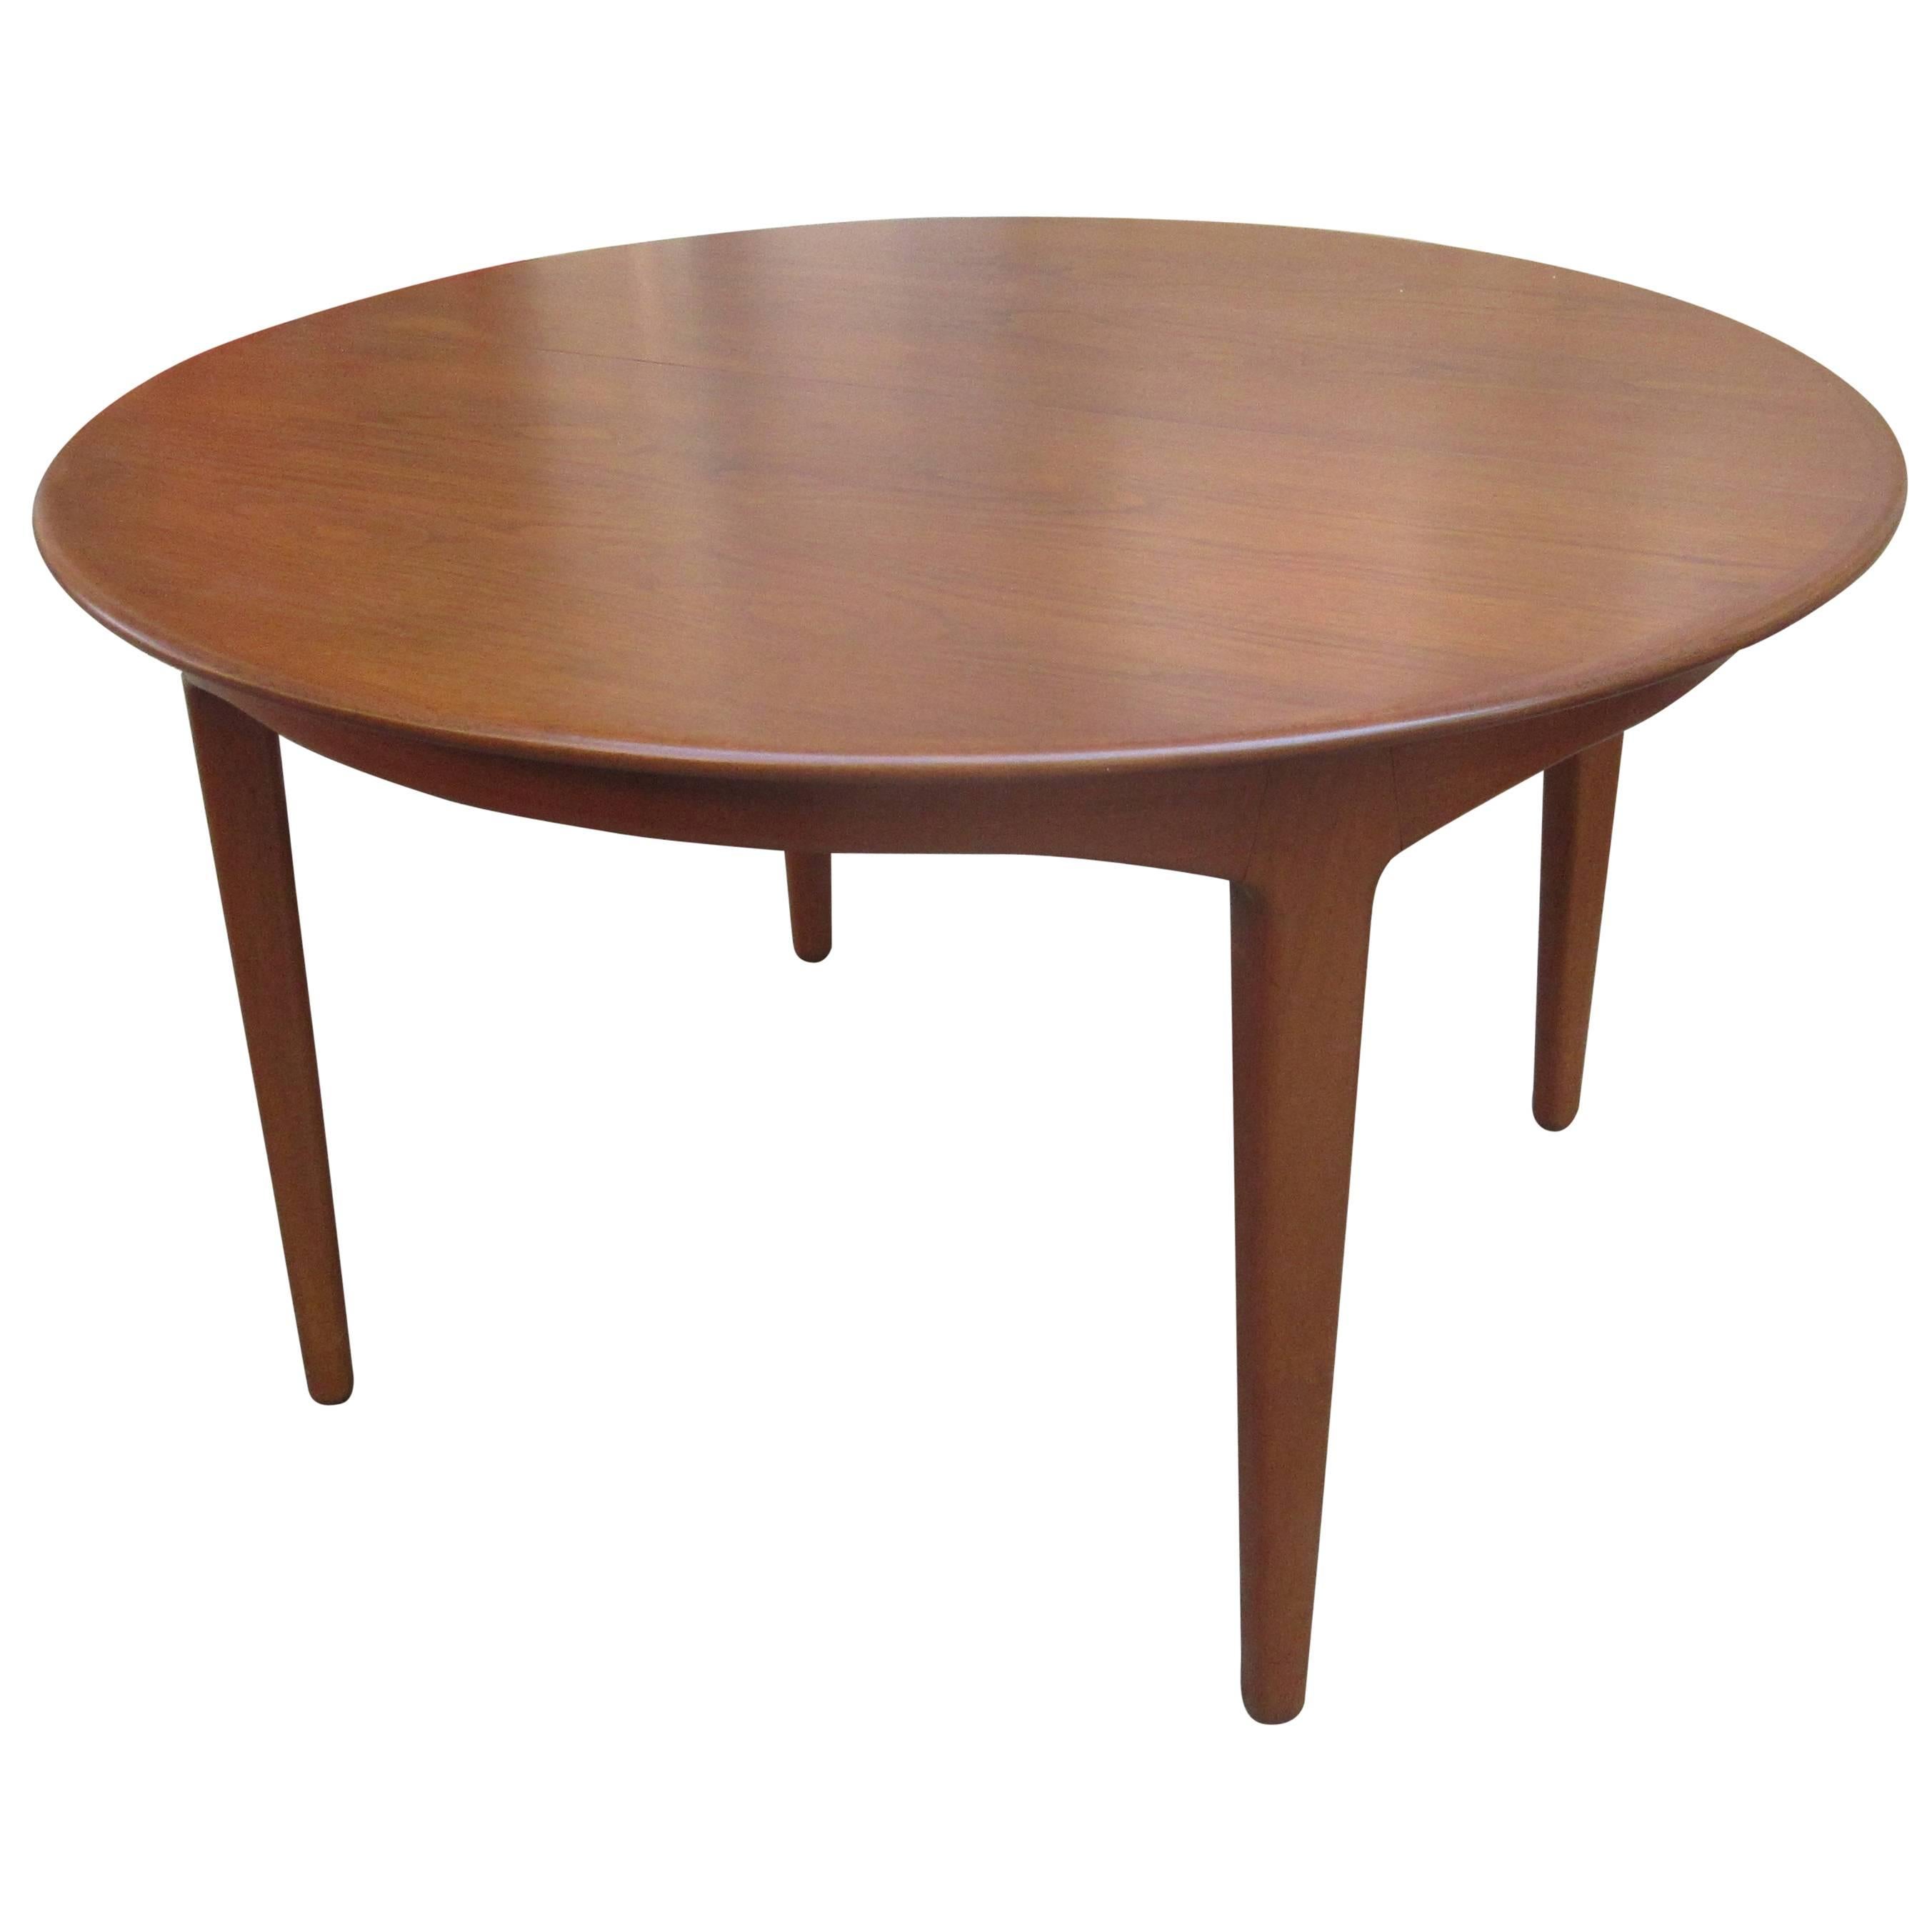 Henning Kjaernulf Teak Round Table with Four Leaves